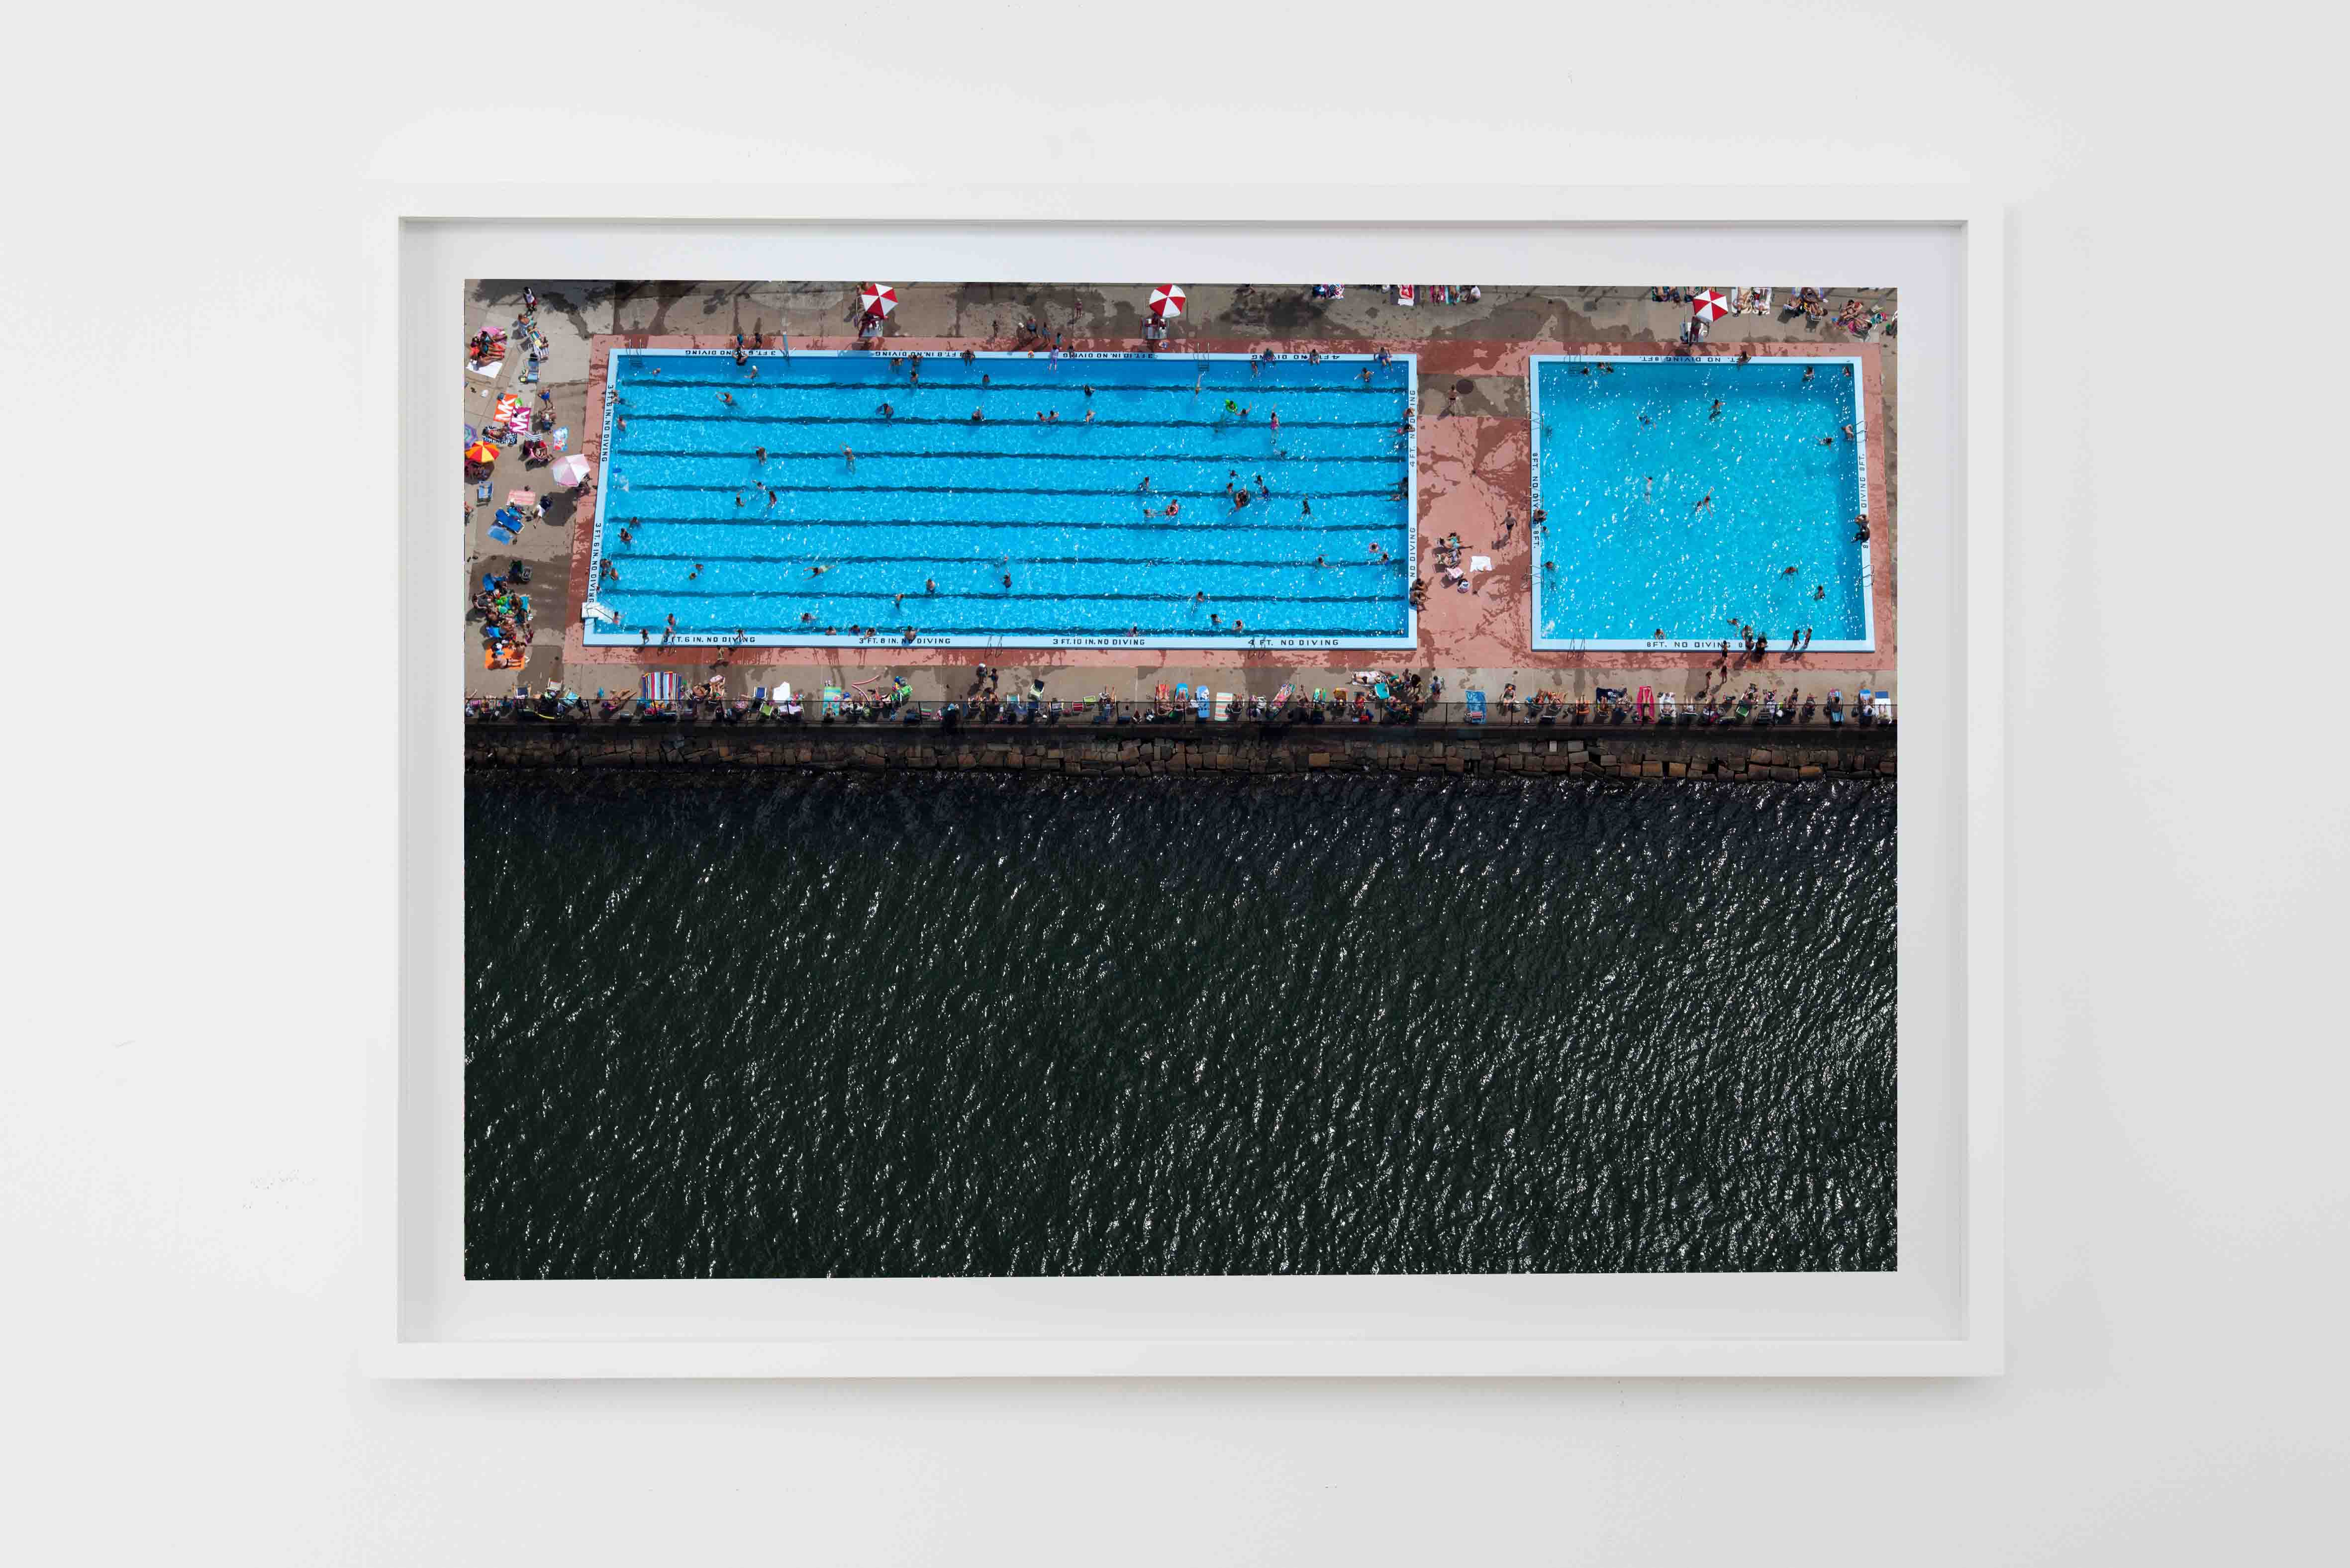 Alex MacLean, 'Pool Next to the Charles River, Cambridge, MA 2012'